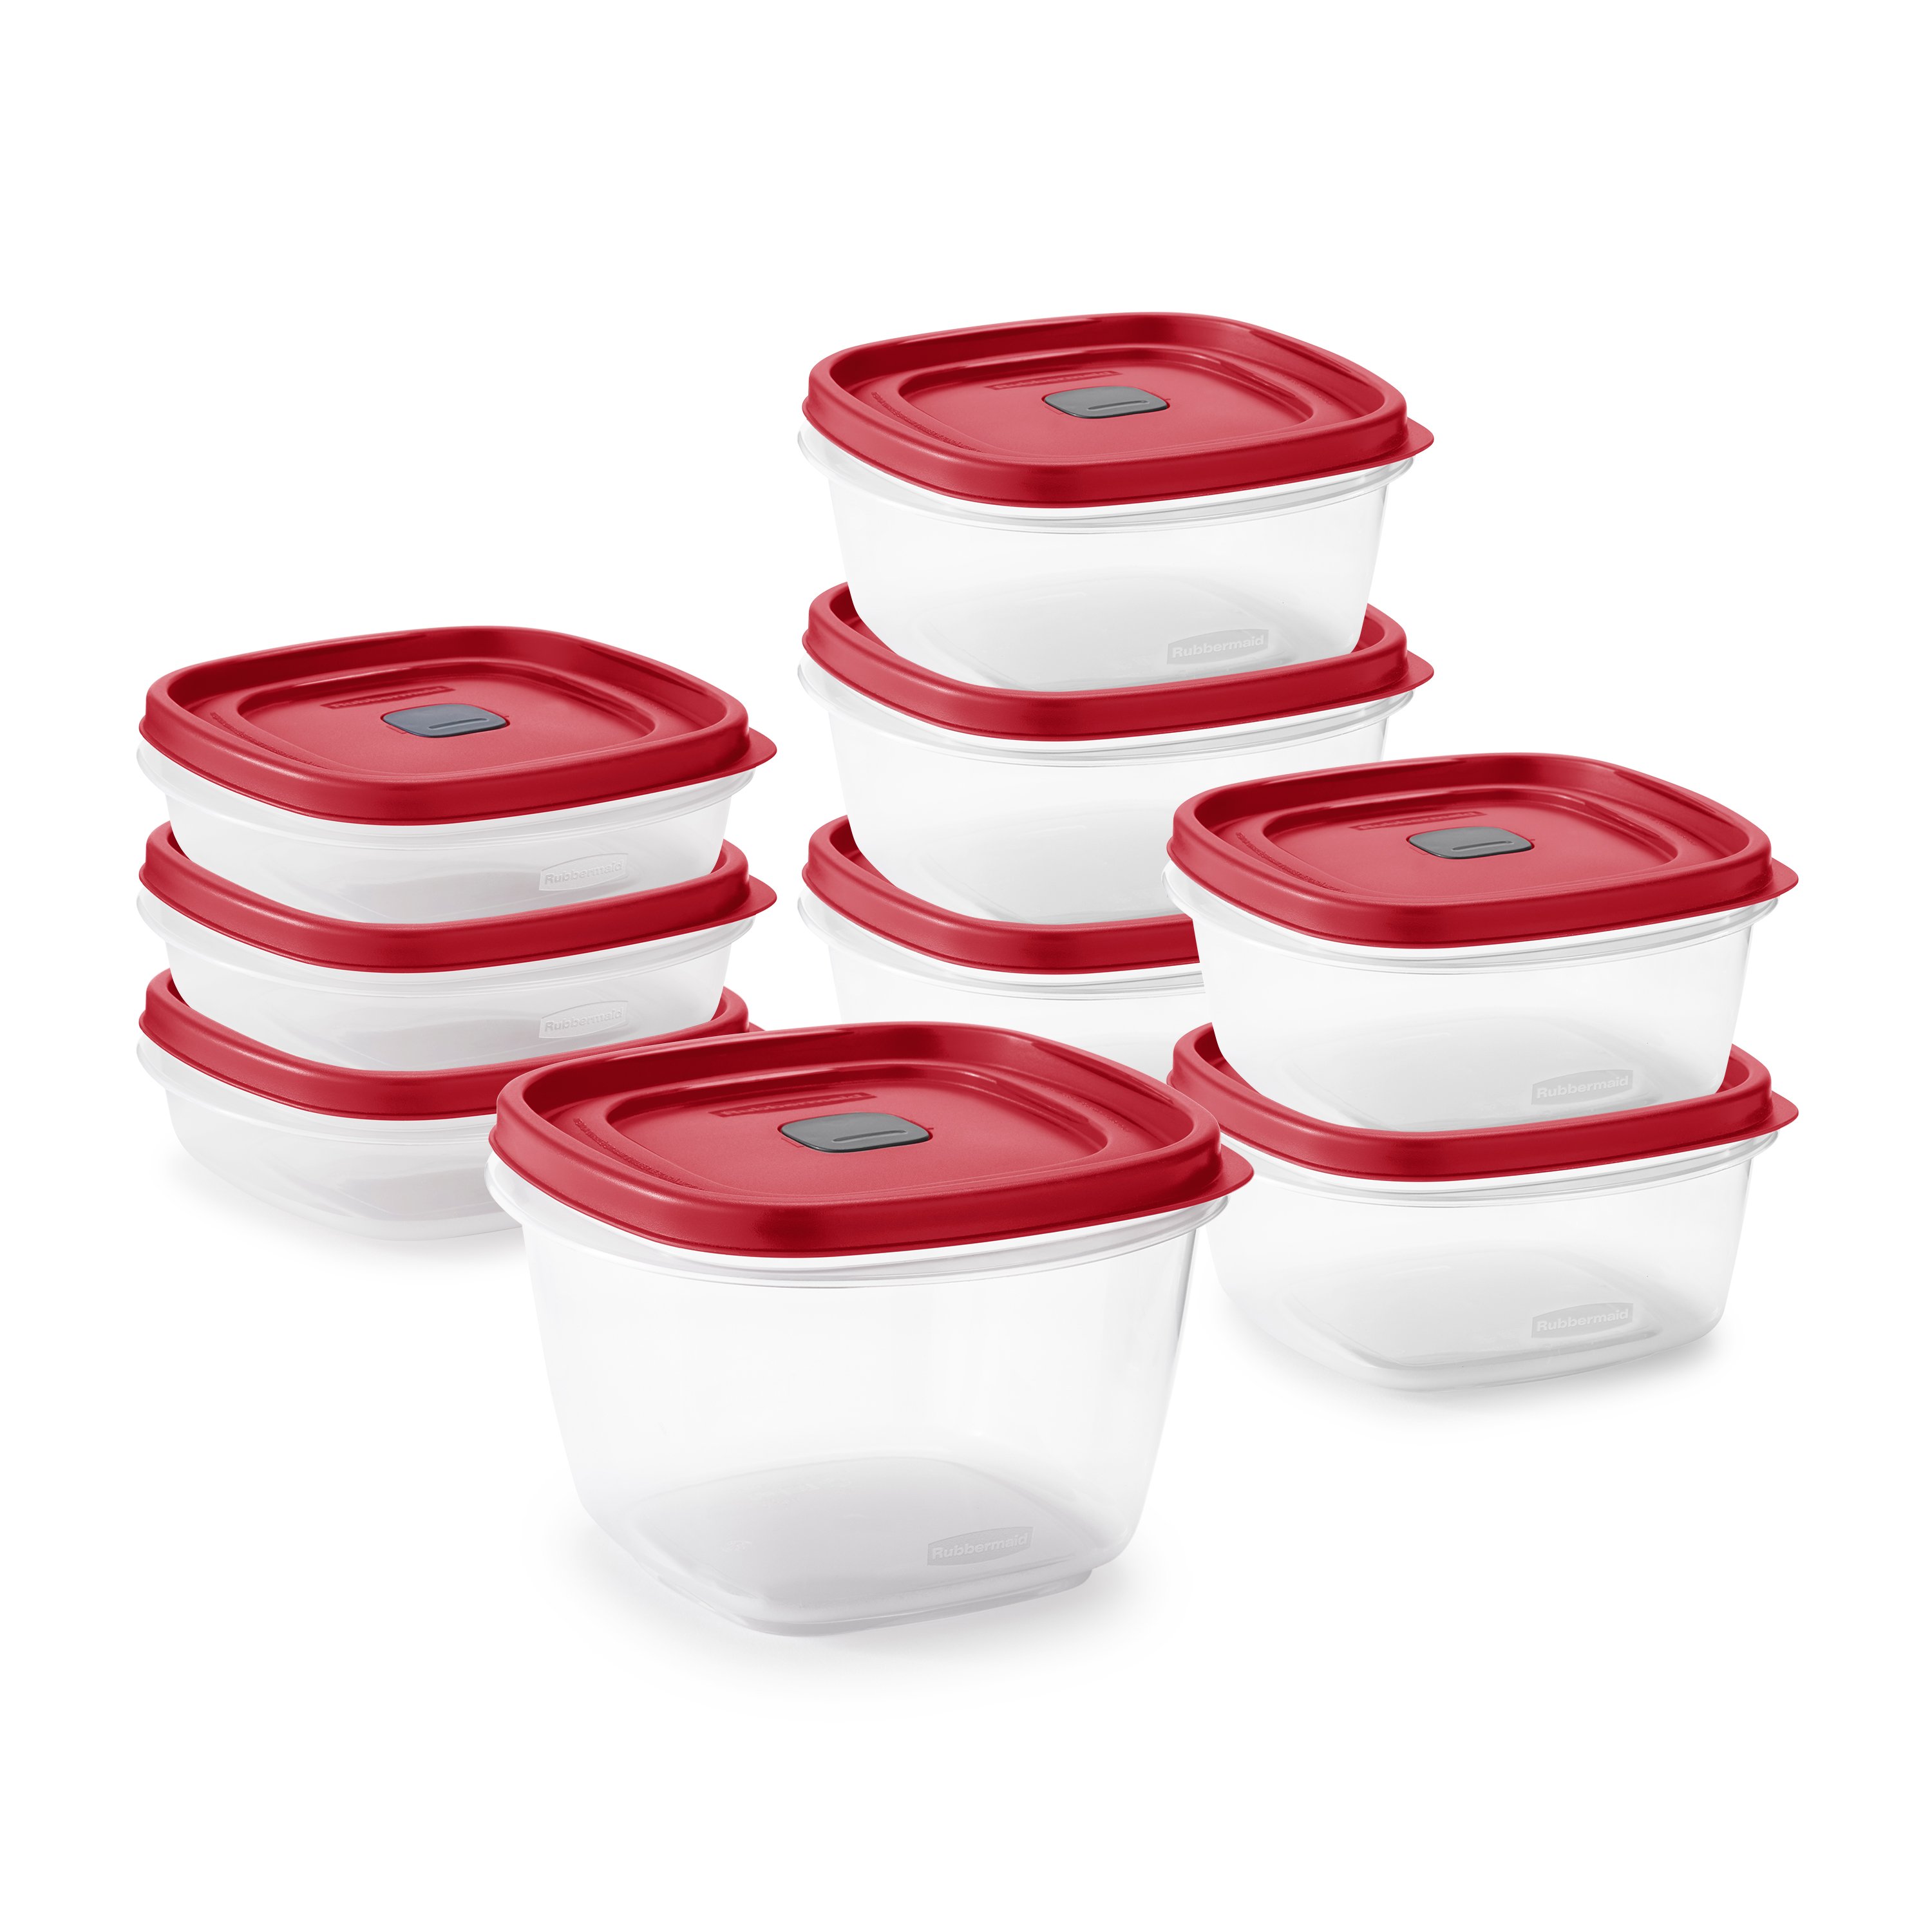 Rubbermaid Set of 4 Food Storage Container Bowls with Lids 4 Colors 4 Sizes